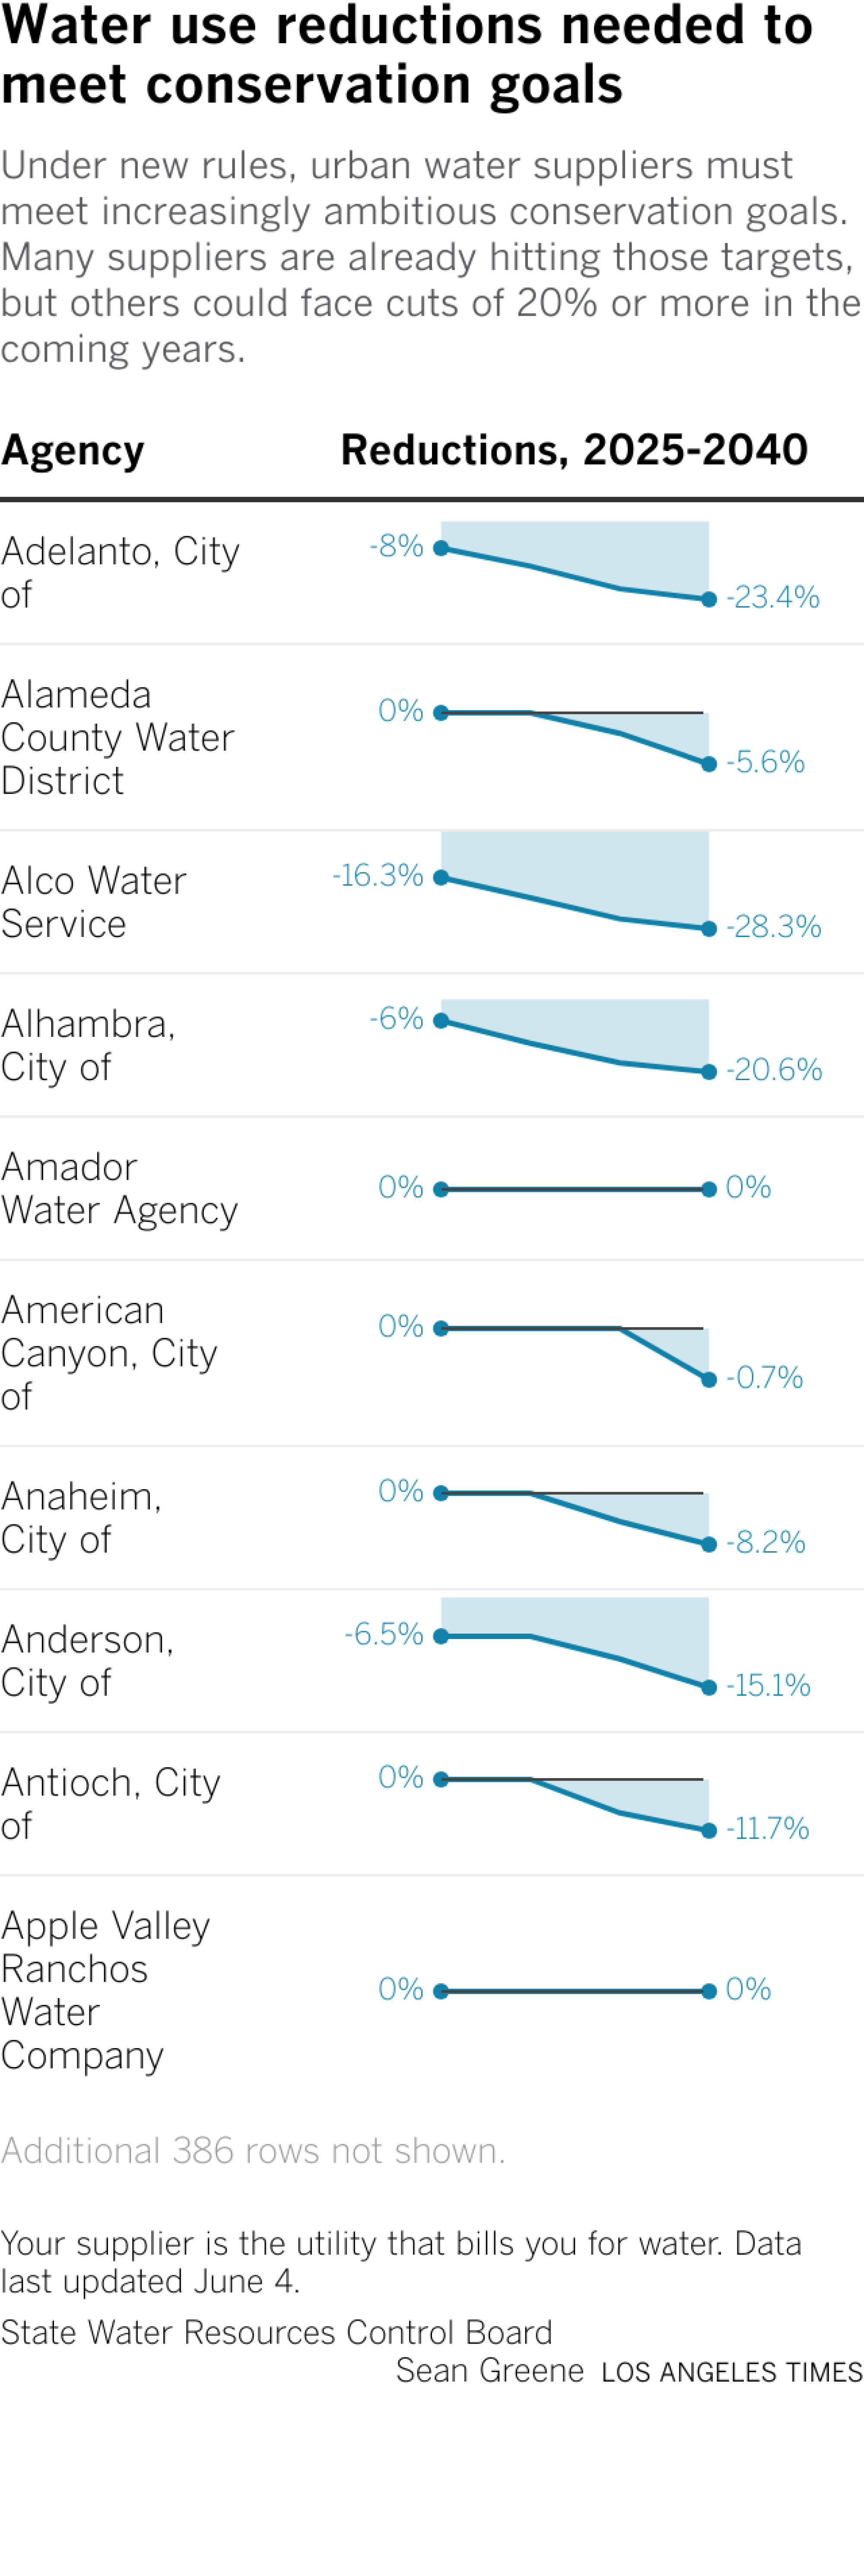 The table lists about 400 urban water suppliers and the reductions in water use they have made.